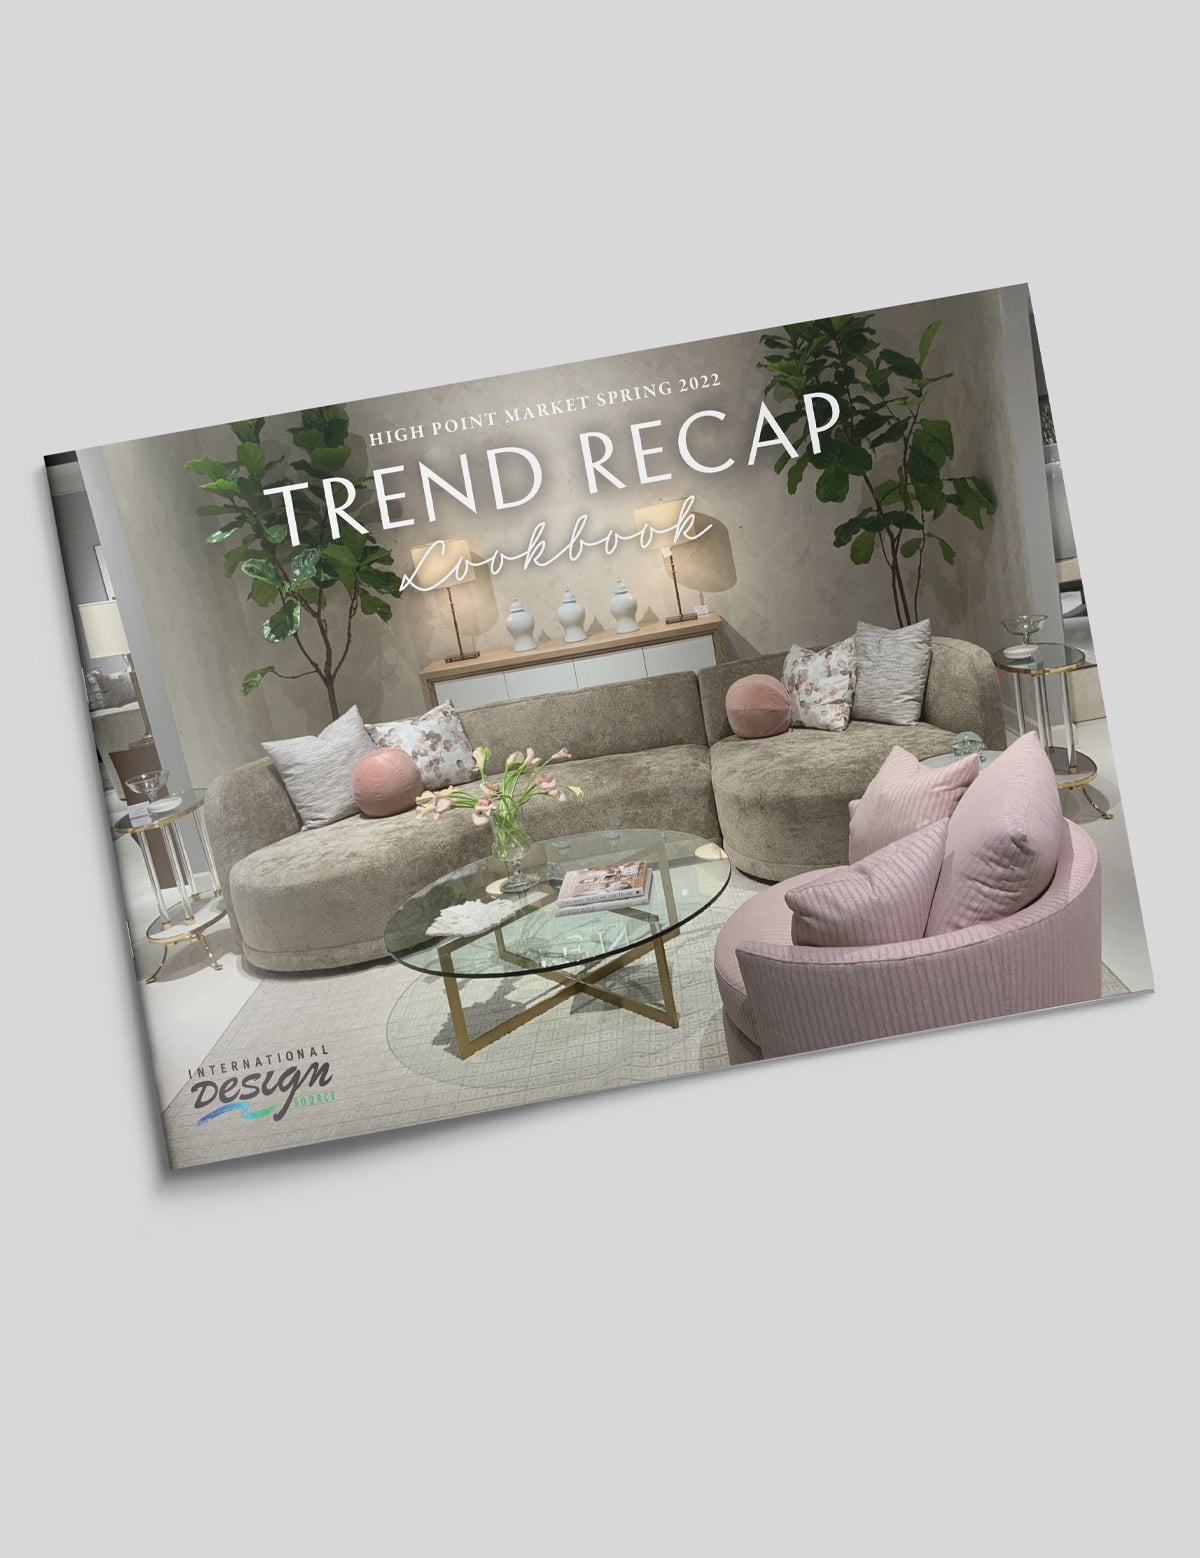 High Point Market Review Lookbook - Spring 2021